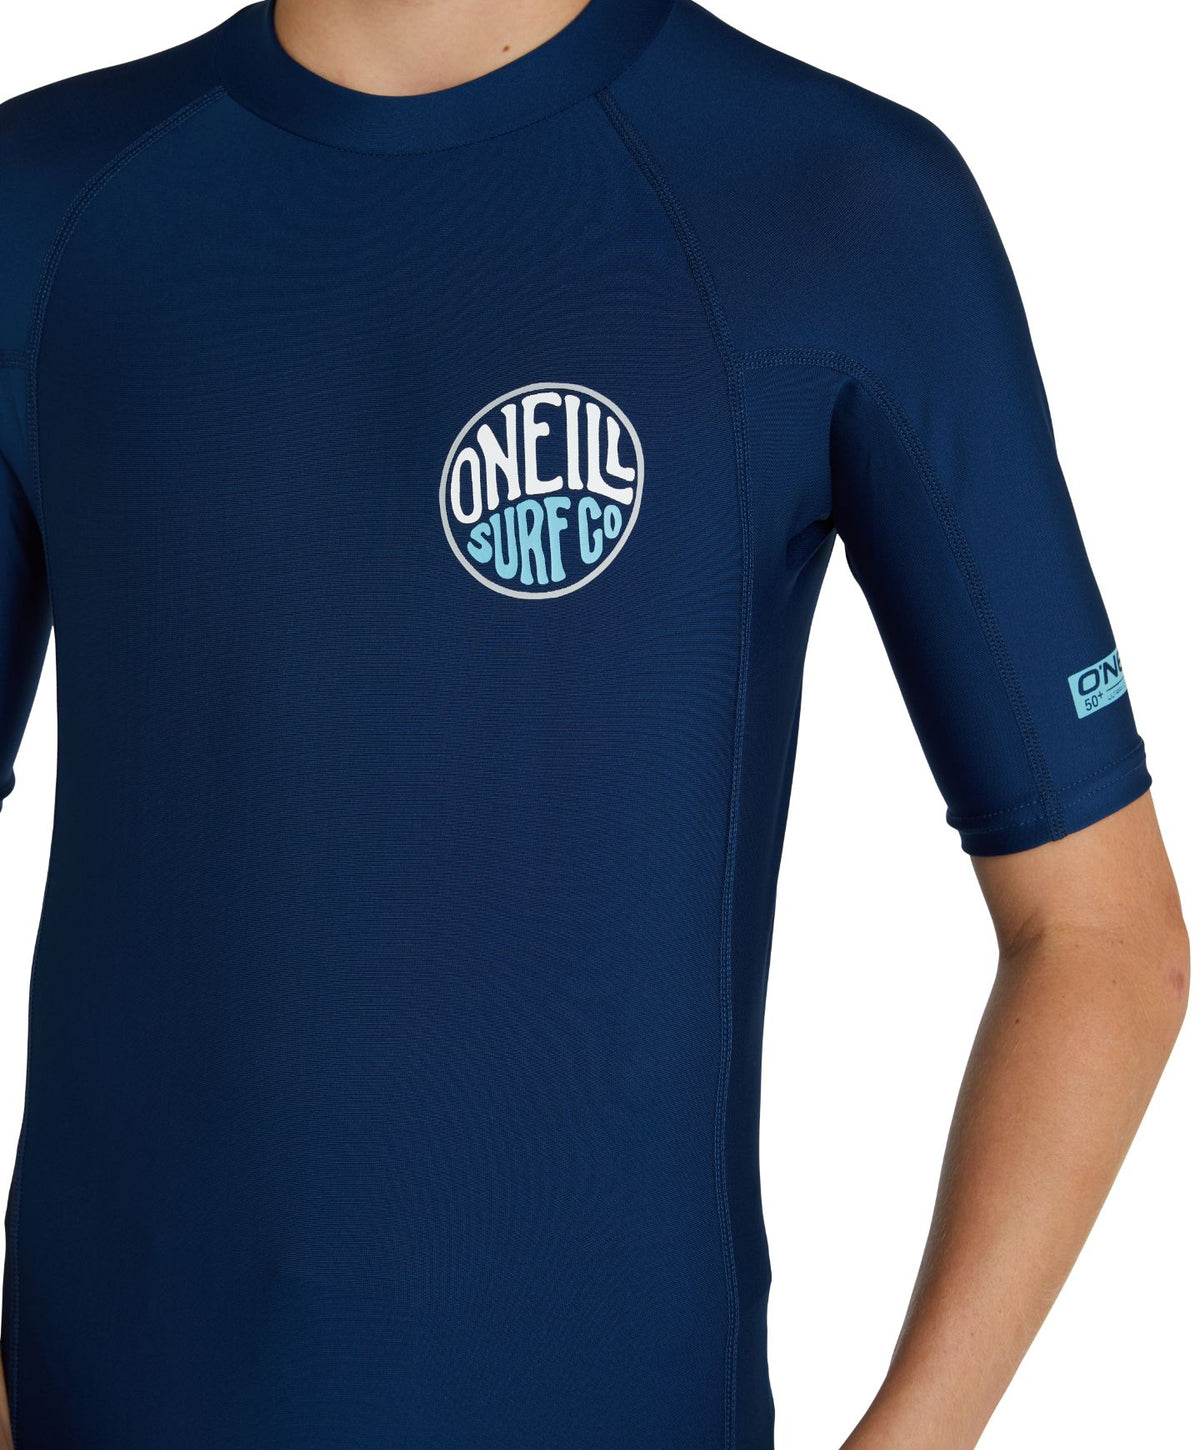 Kids Rash Vests | Buy Wetsuits & Clothing Online | O'Neill – O'Neill ...